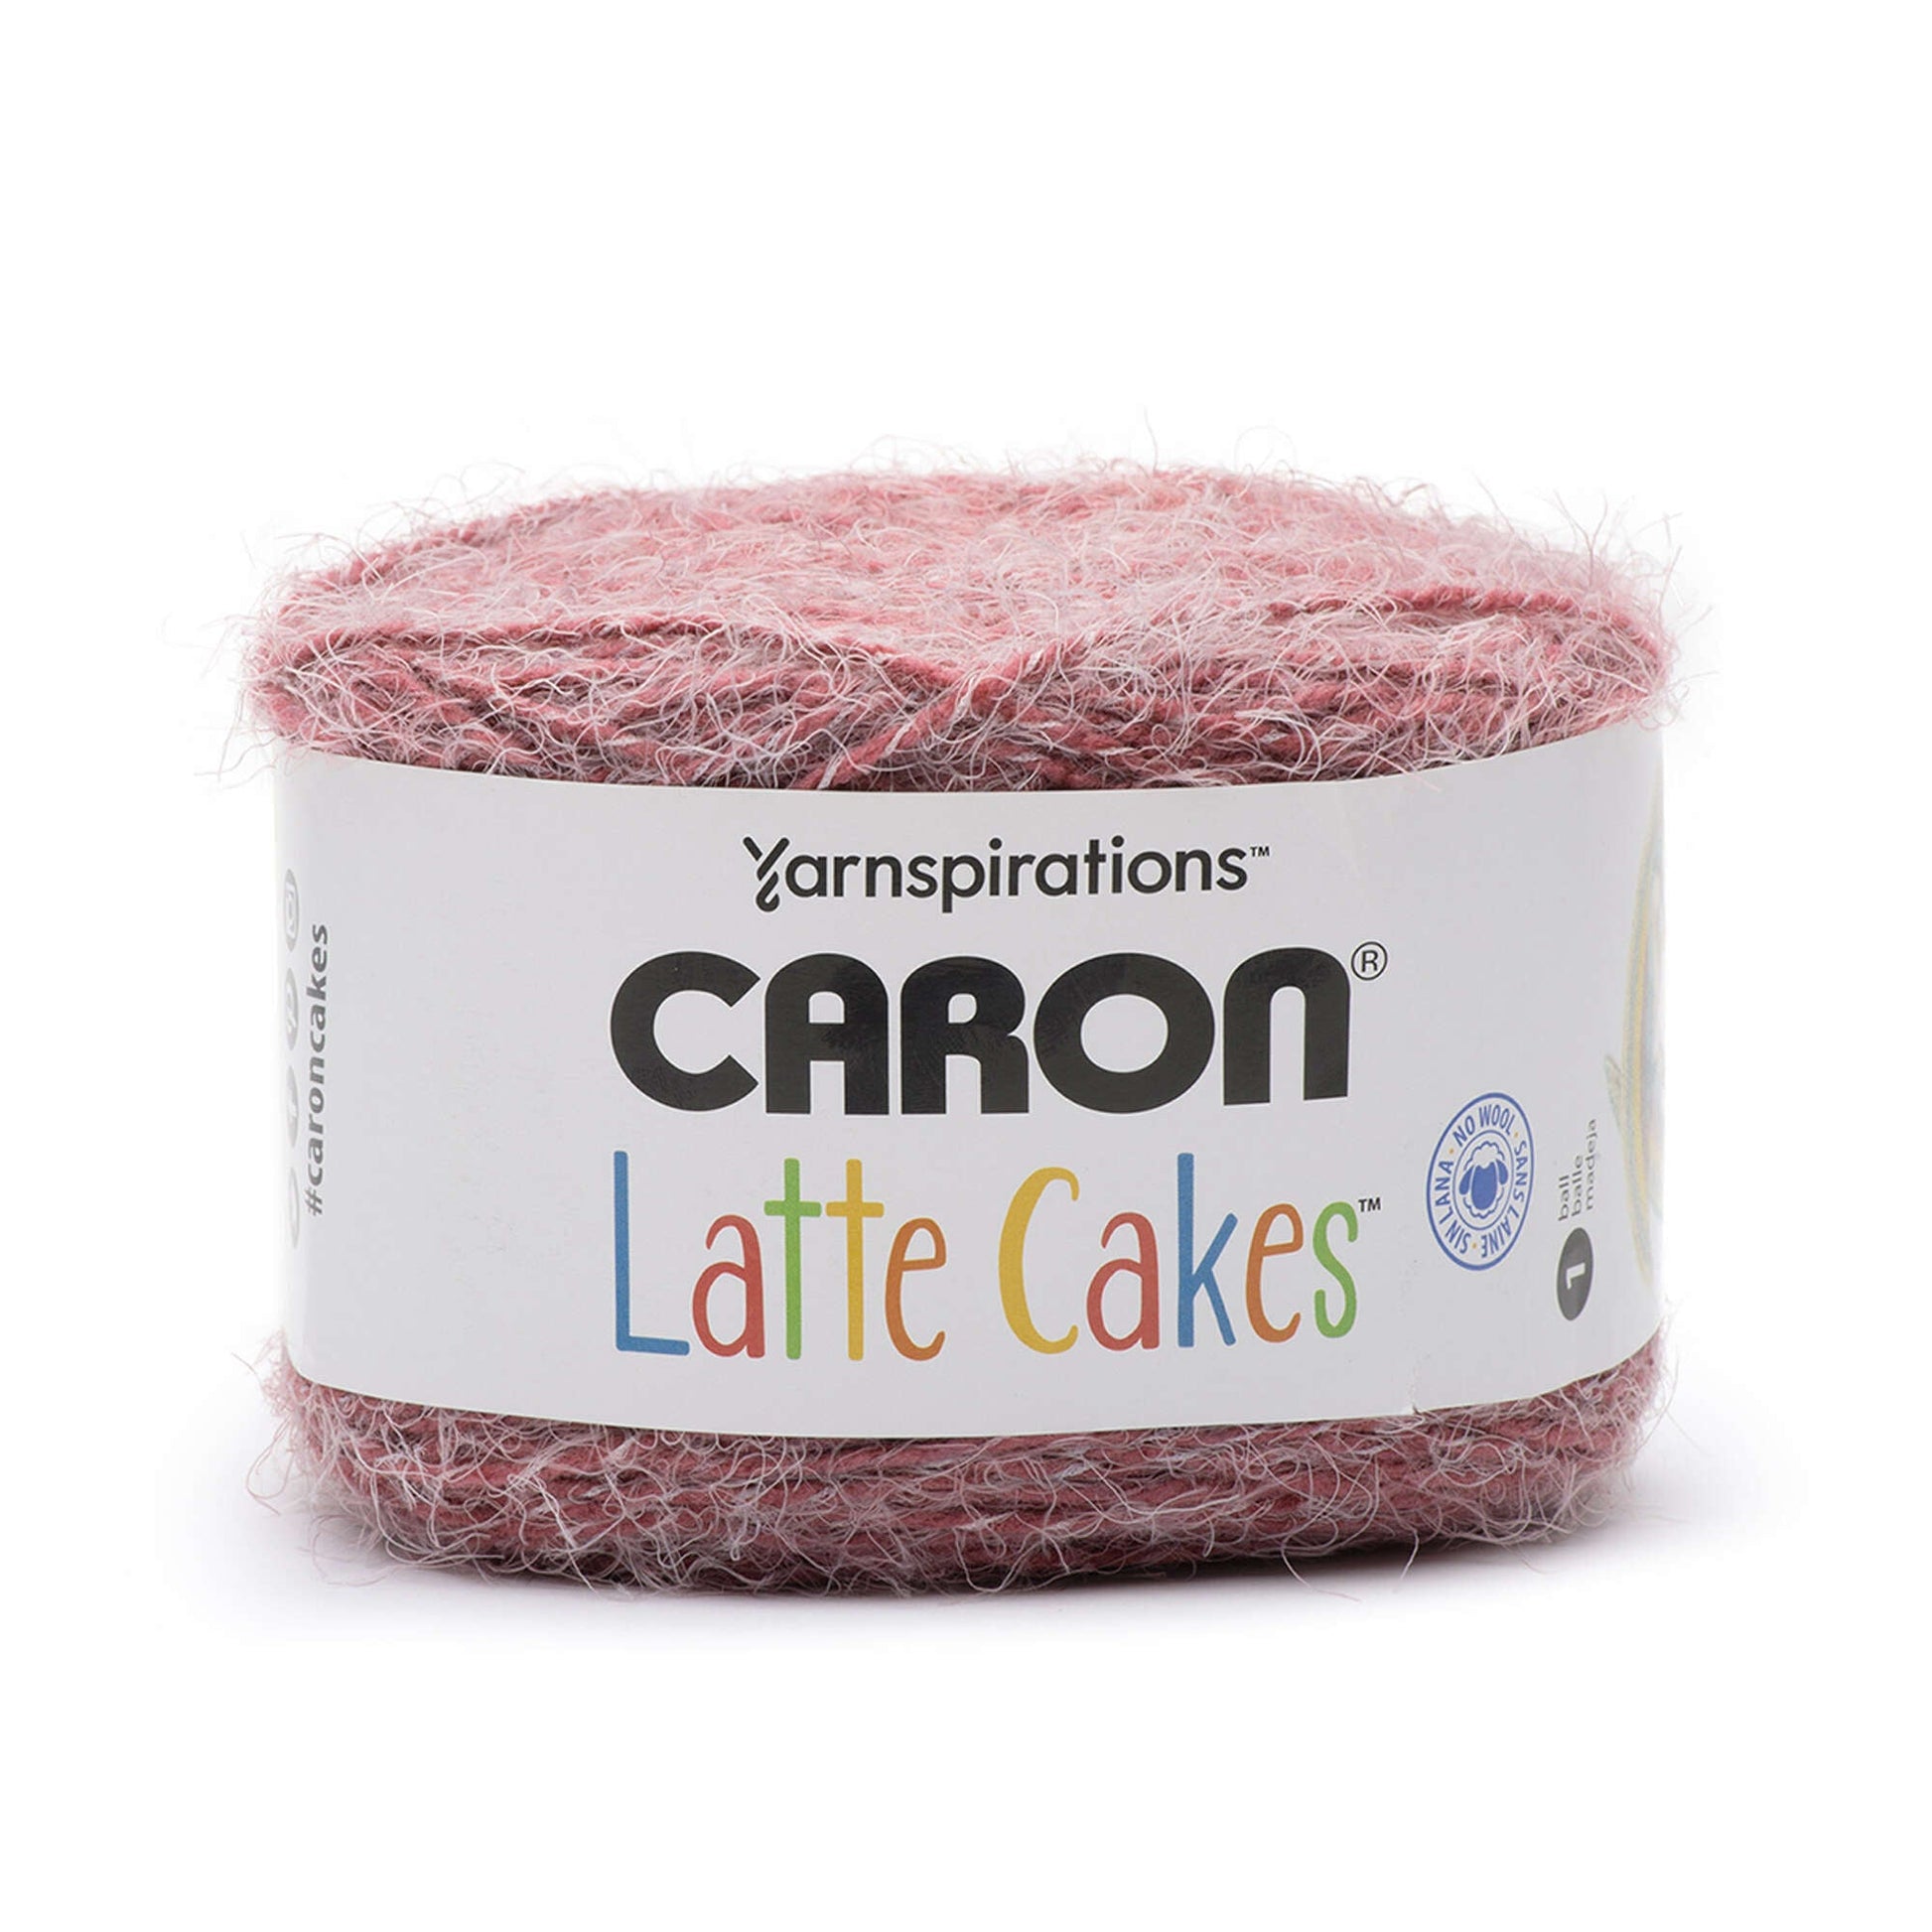 Buy Caron Latte Cake Butter Cookie Online Colombia